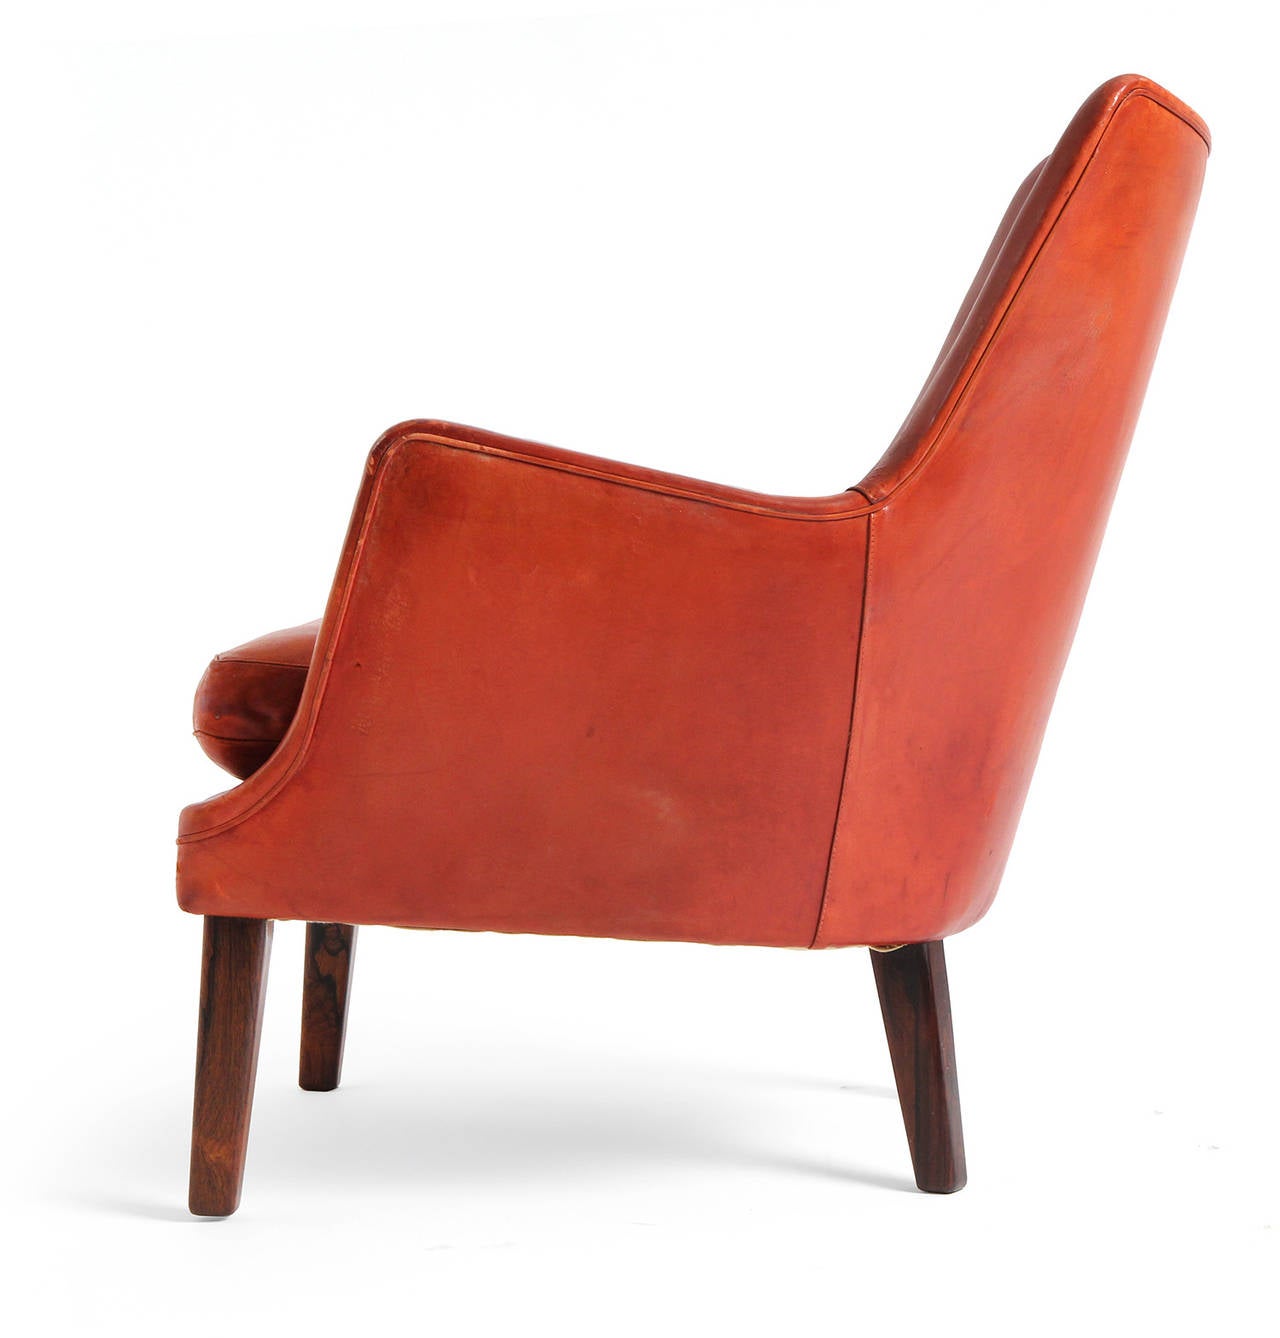 An uncommon, sculptural and wonderfully tactile lounge chair having a hand stitched natural leather body with inverted tufting and a generous down-filled cushion, floating on carved solid Brazilian rosewood legs.